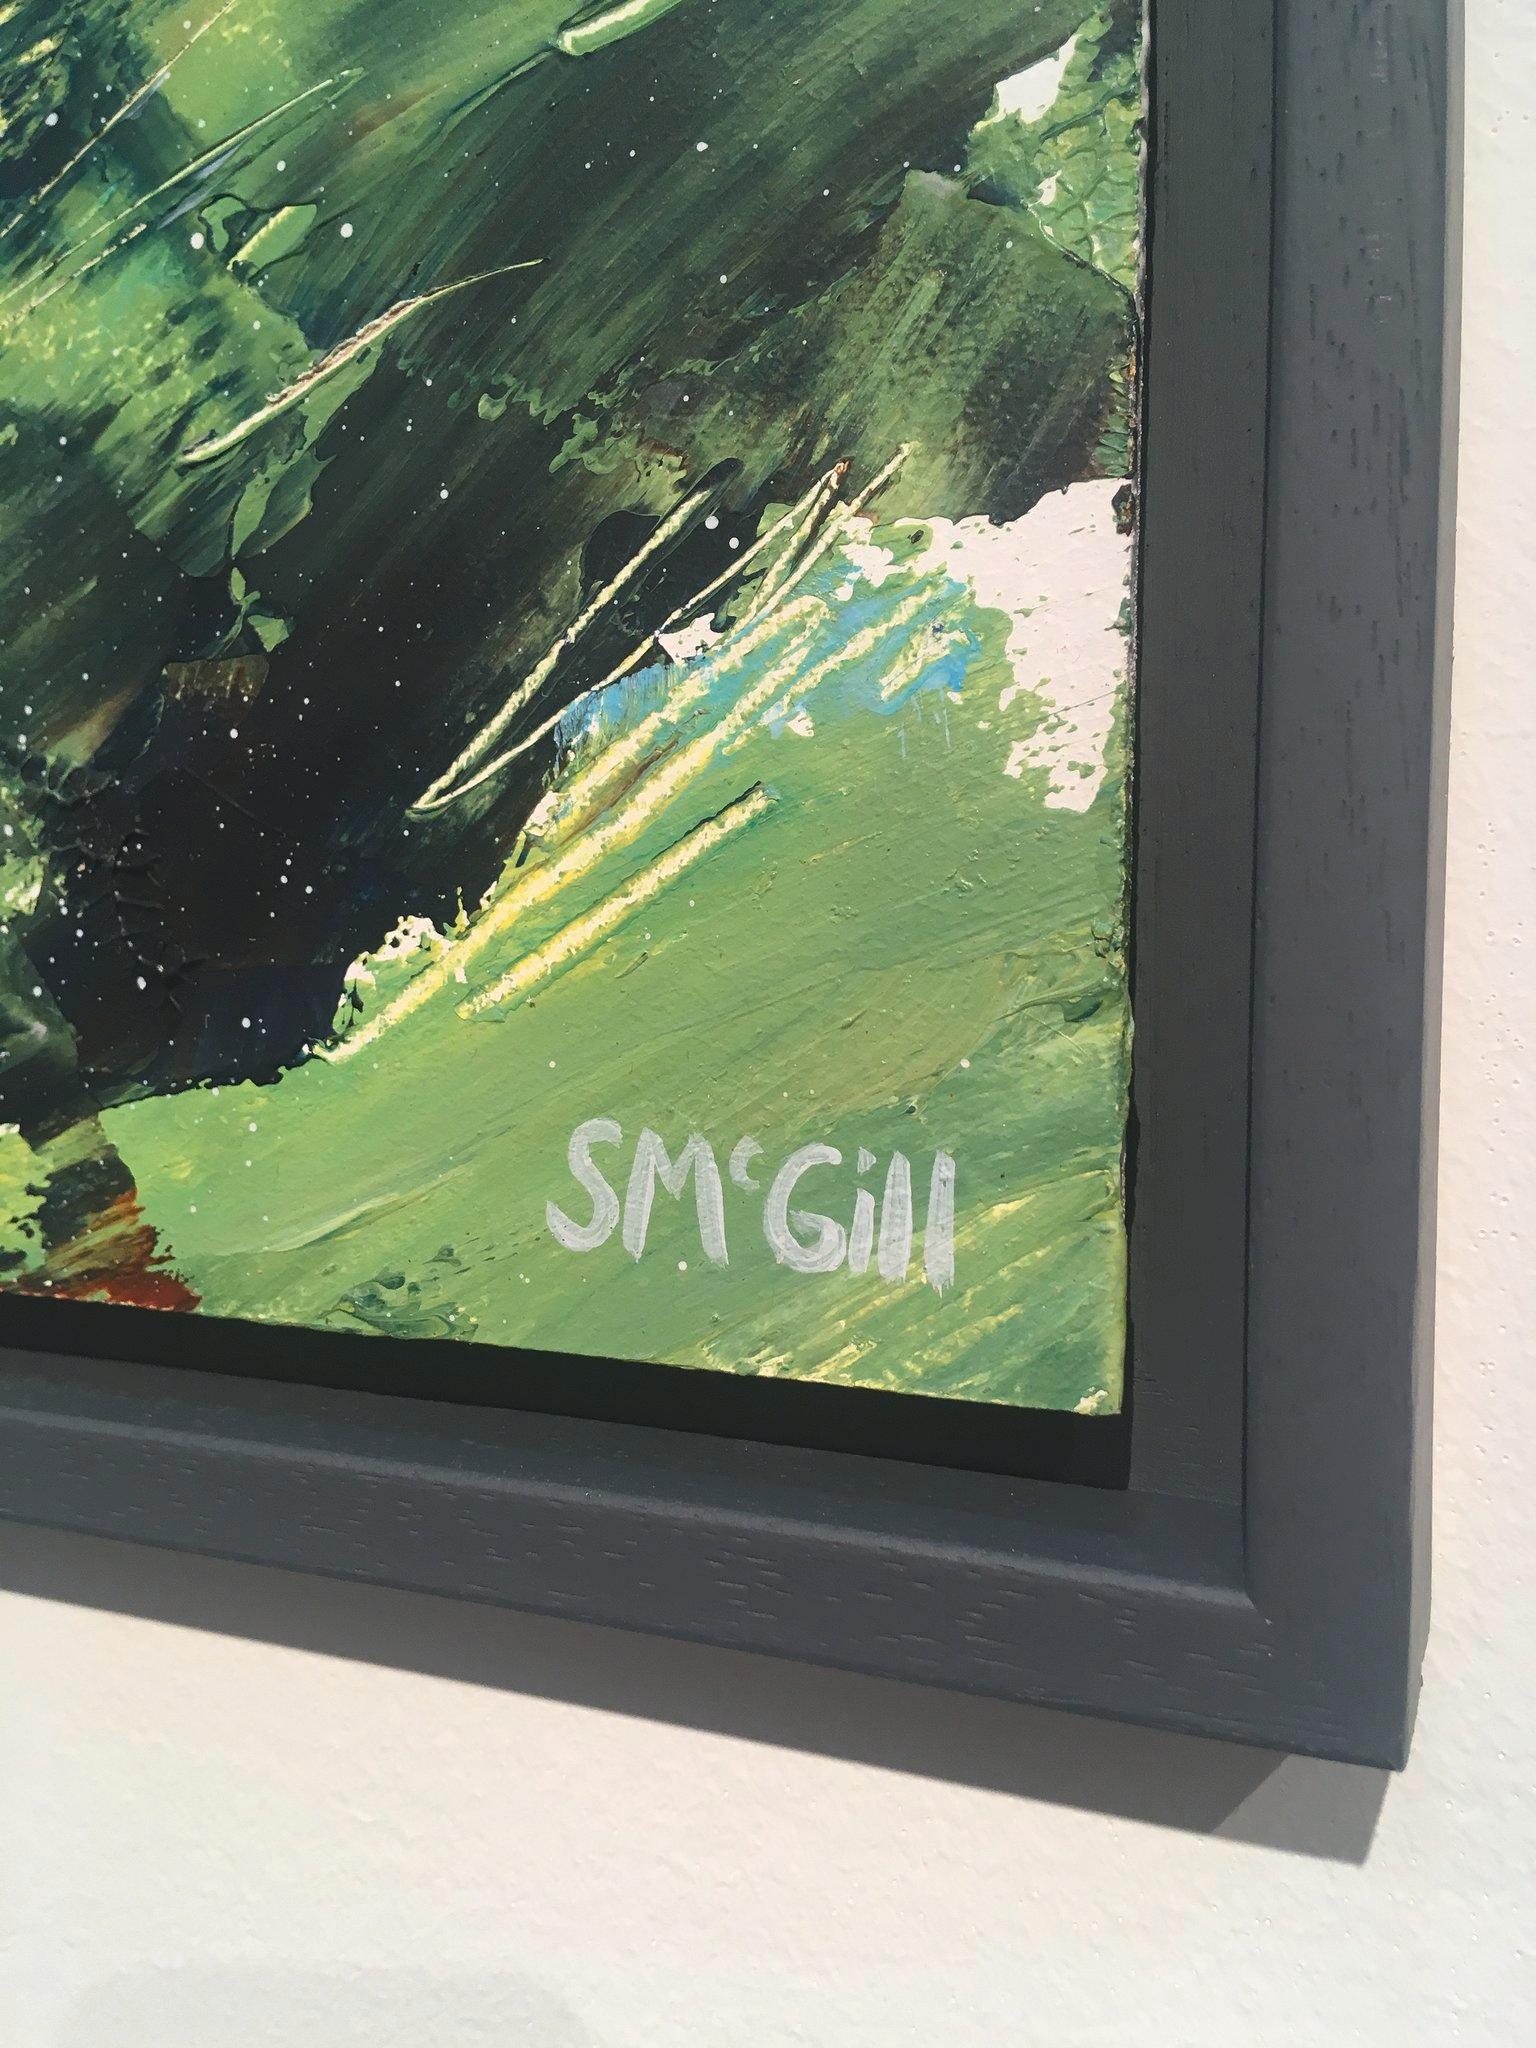 Much of Sian's inspiration comes directly from the places where she loves to spend time, outdoors enjoying the coastline and mountains of Wales. The paintings are a response to the landscape, an attempt to capture something of the experience and the